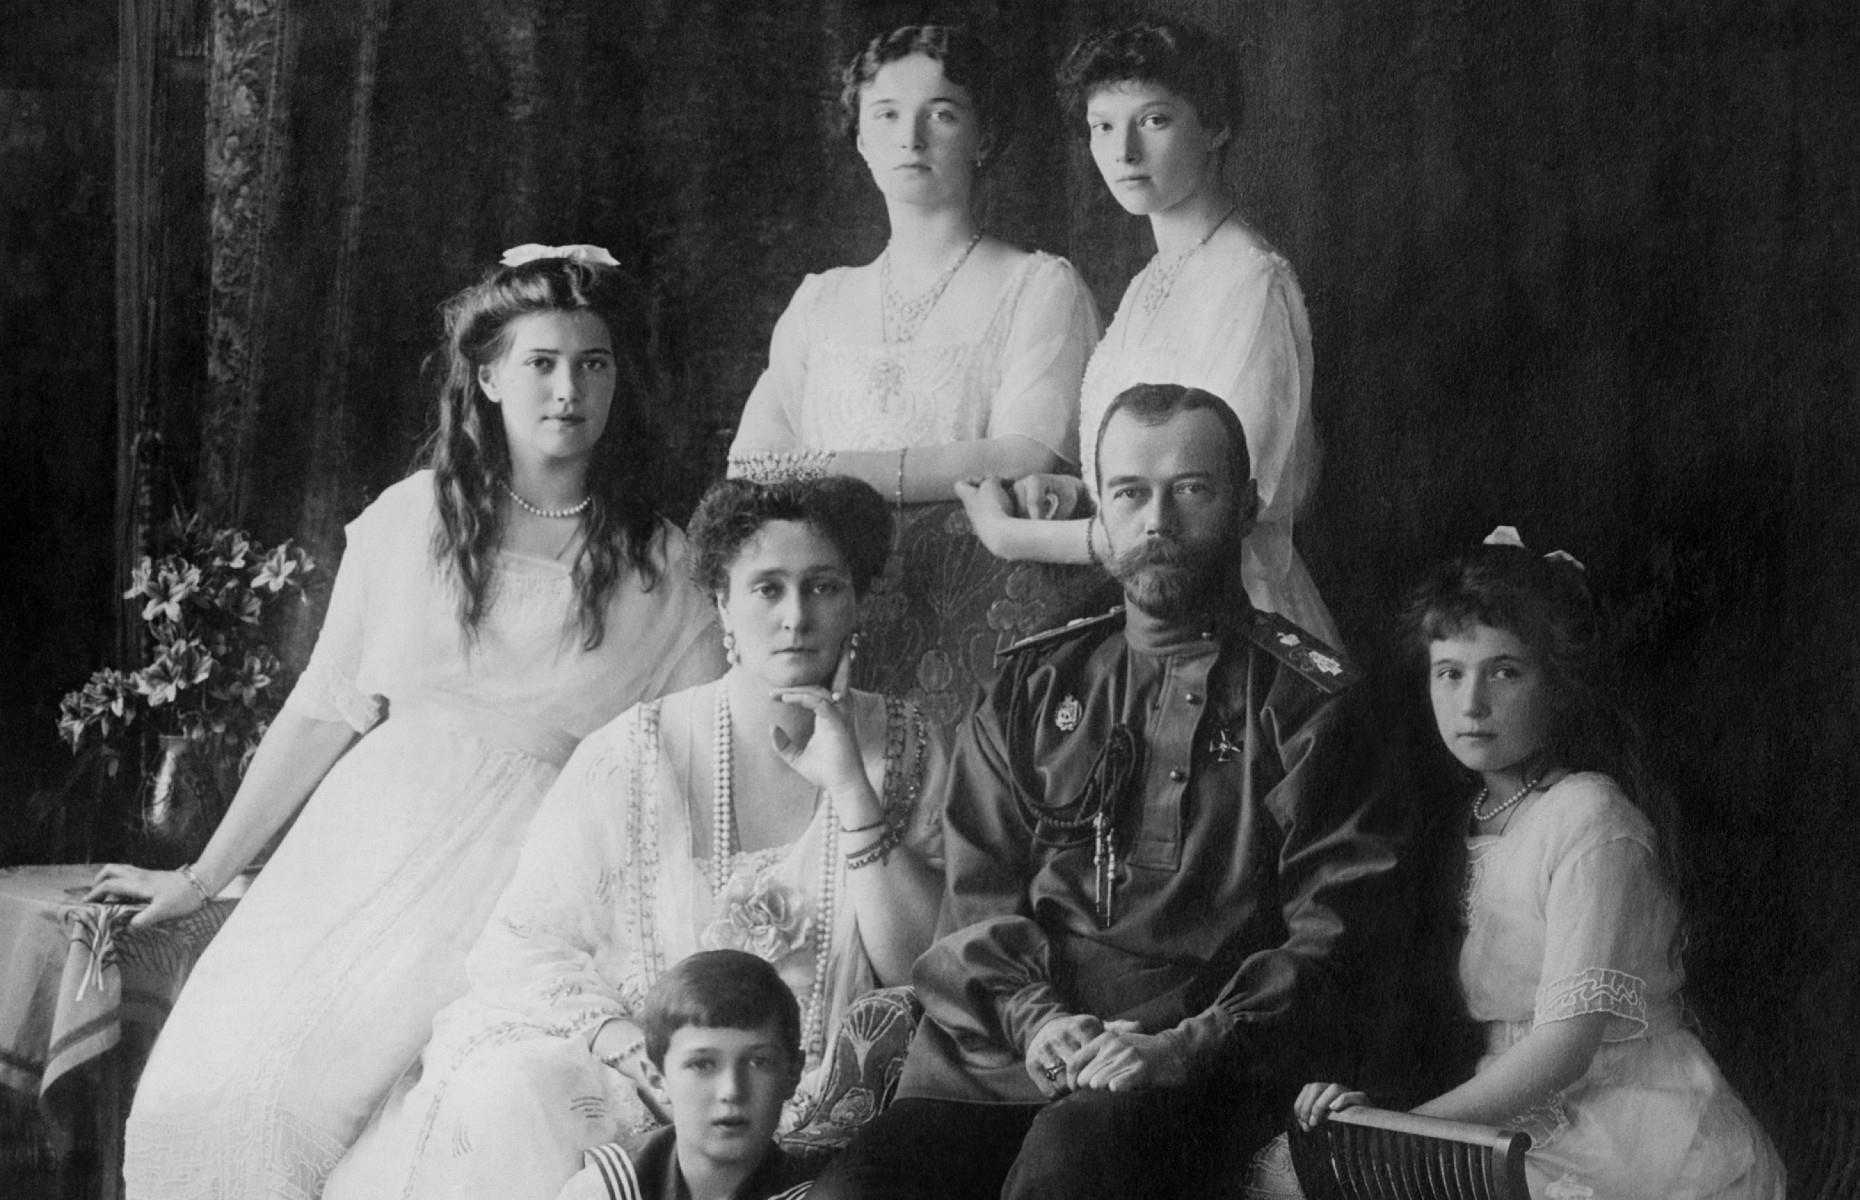 The rise and fall of Russia #39 s ruling House of Romanov lovemoney com